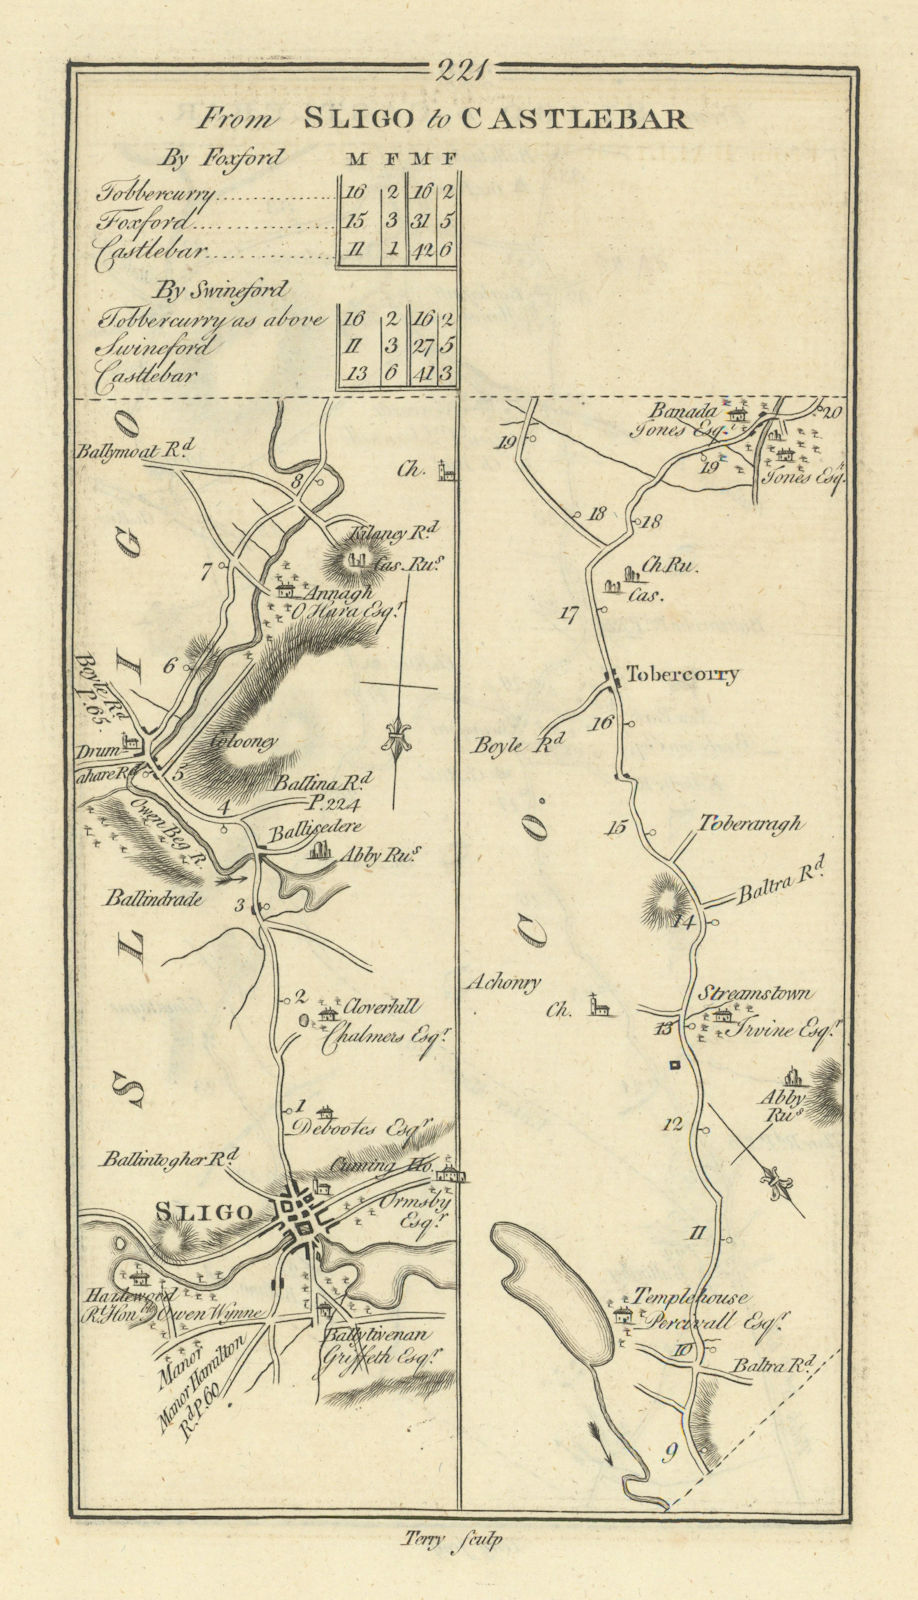 Associate Product #221 From Sligo to Castlebar. Tubbercurry. TAYLOR/SKINNER 1778 old antique map